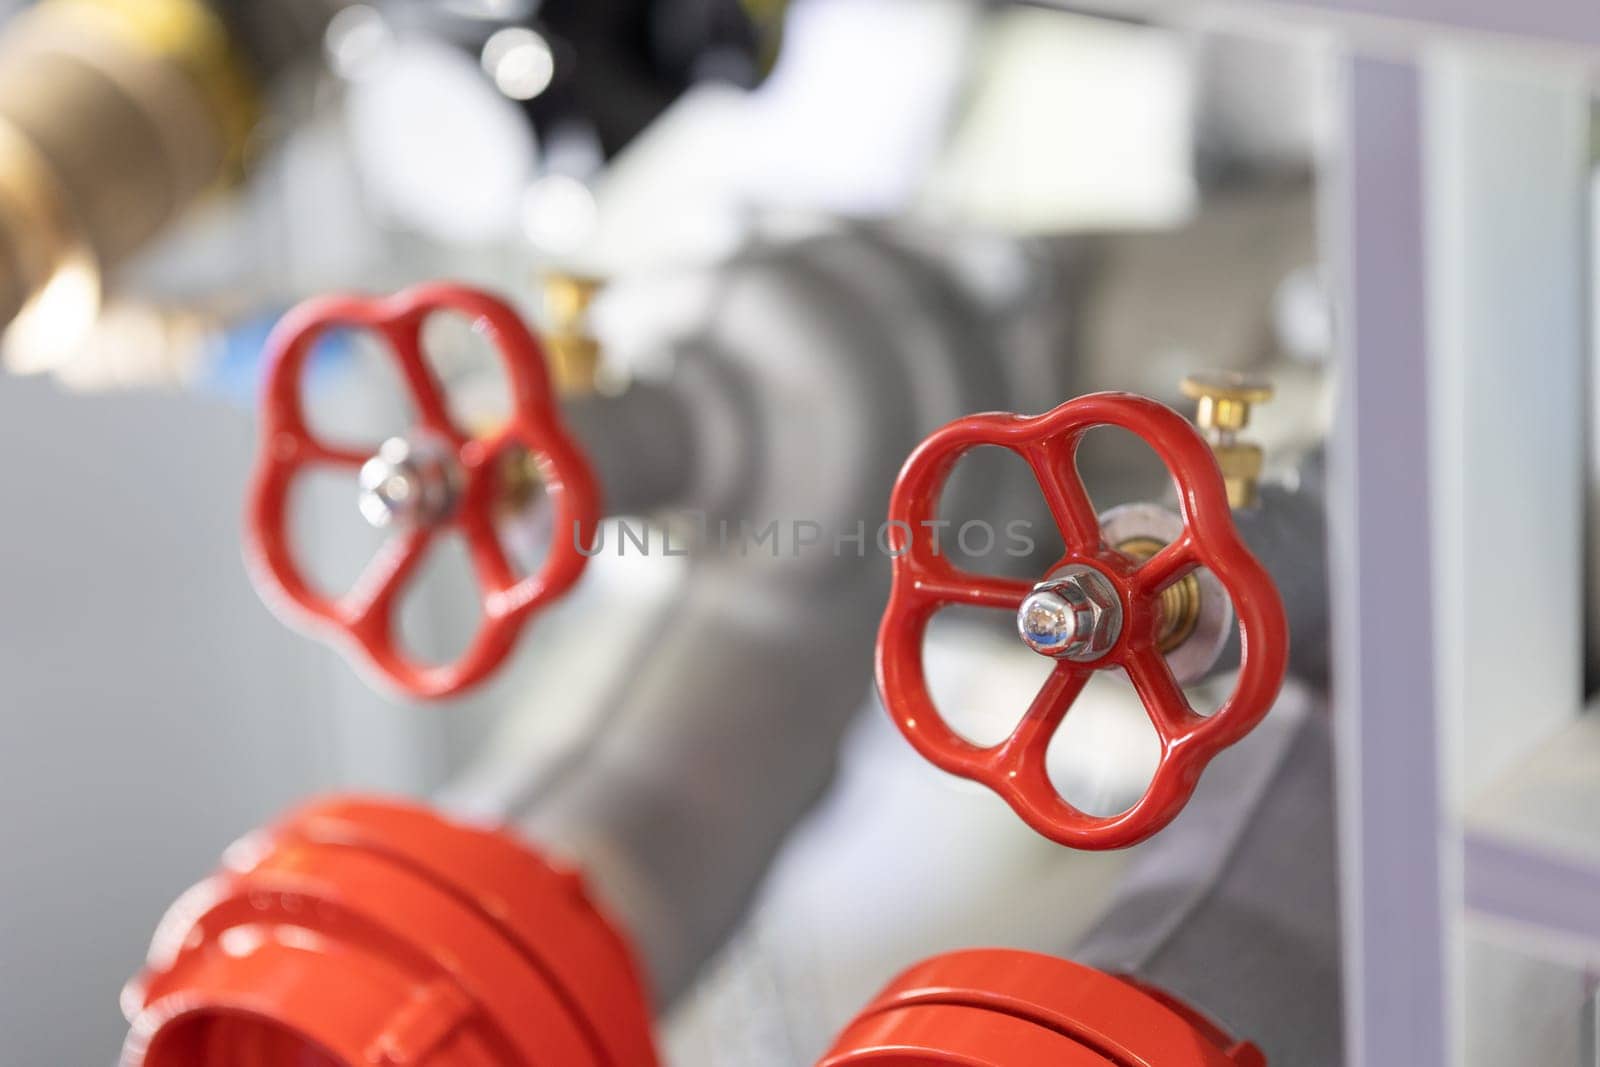 Close-up view of red metallic safety valves with handles.